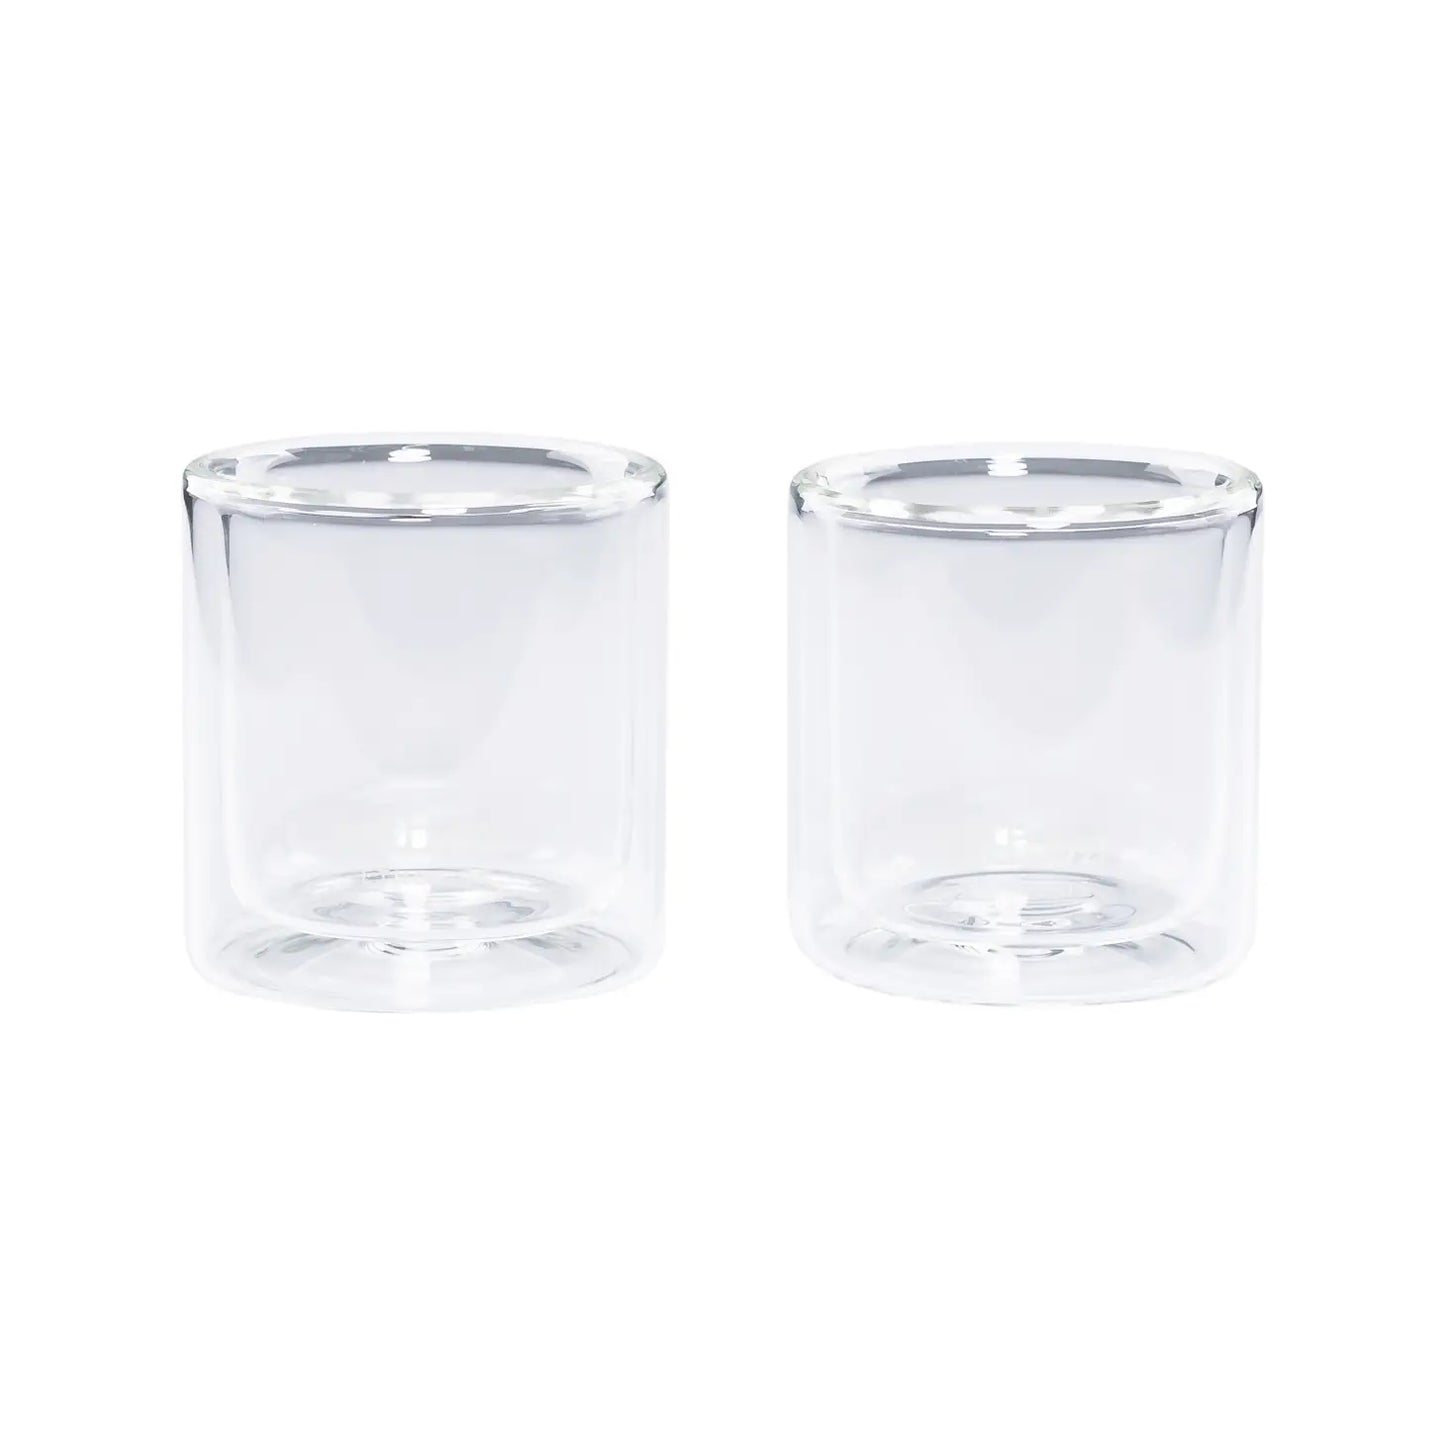 Ethos Double Wall Glass Cup - Set of 2